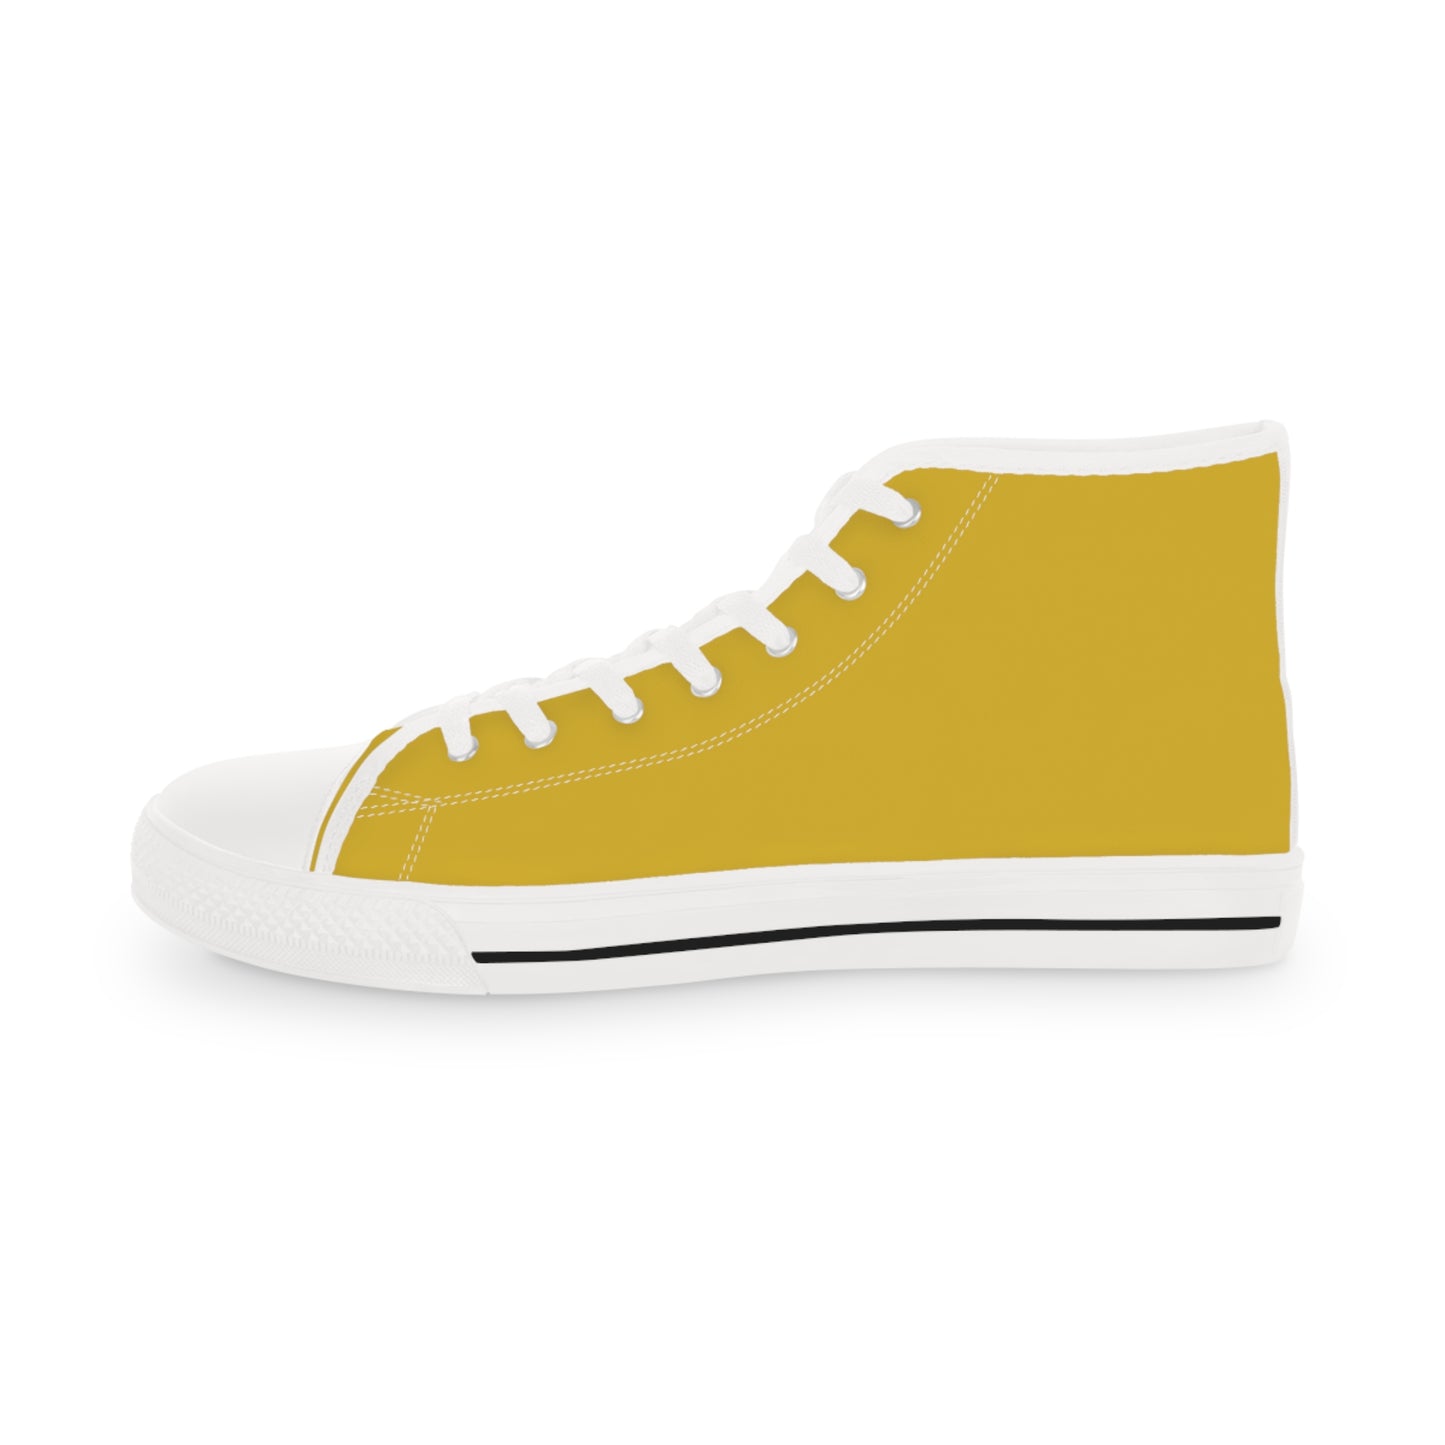 Men's High Top Sneakers - Gold US 14 White sole